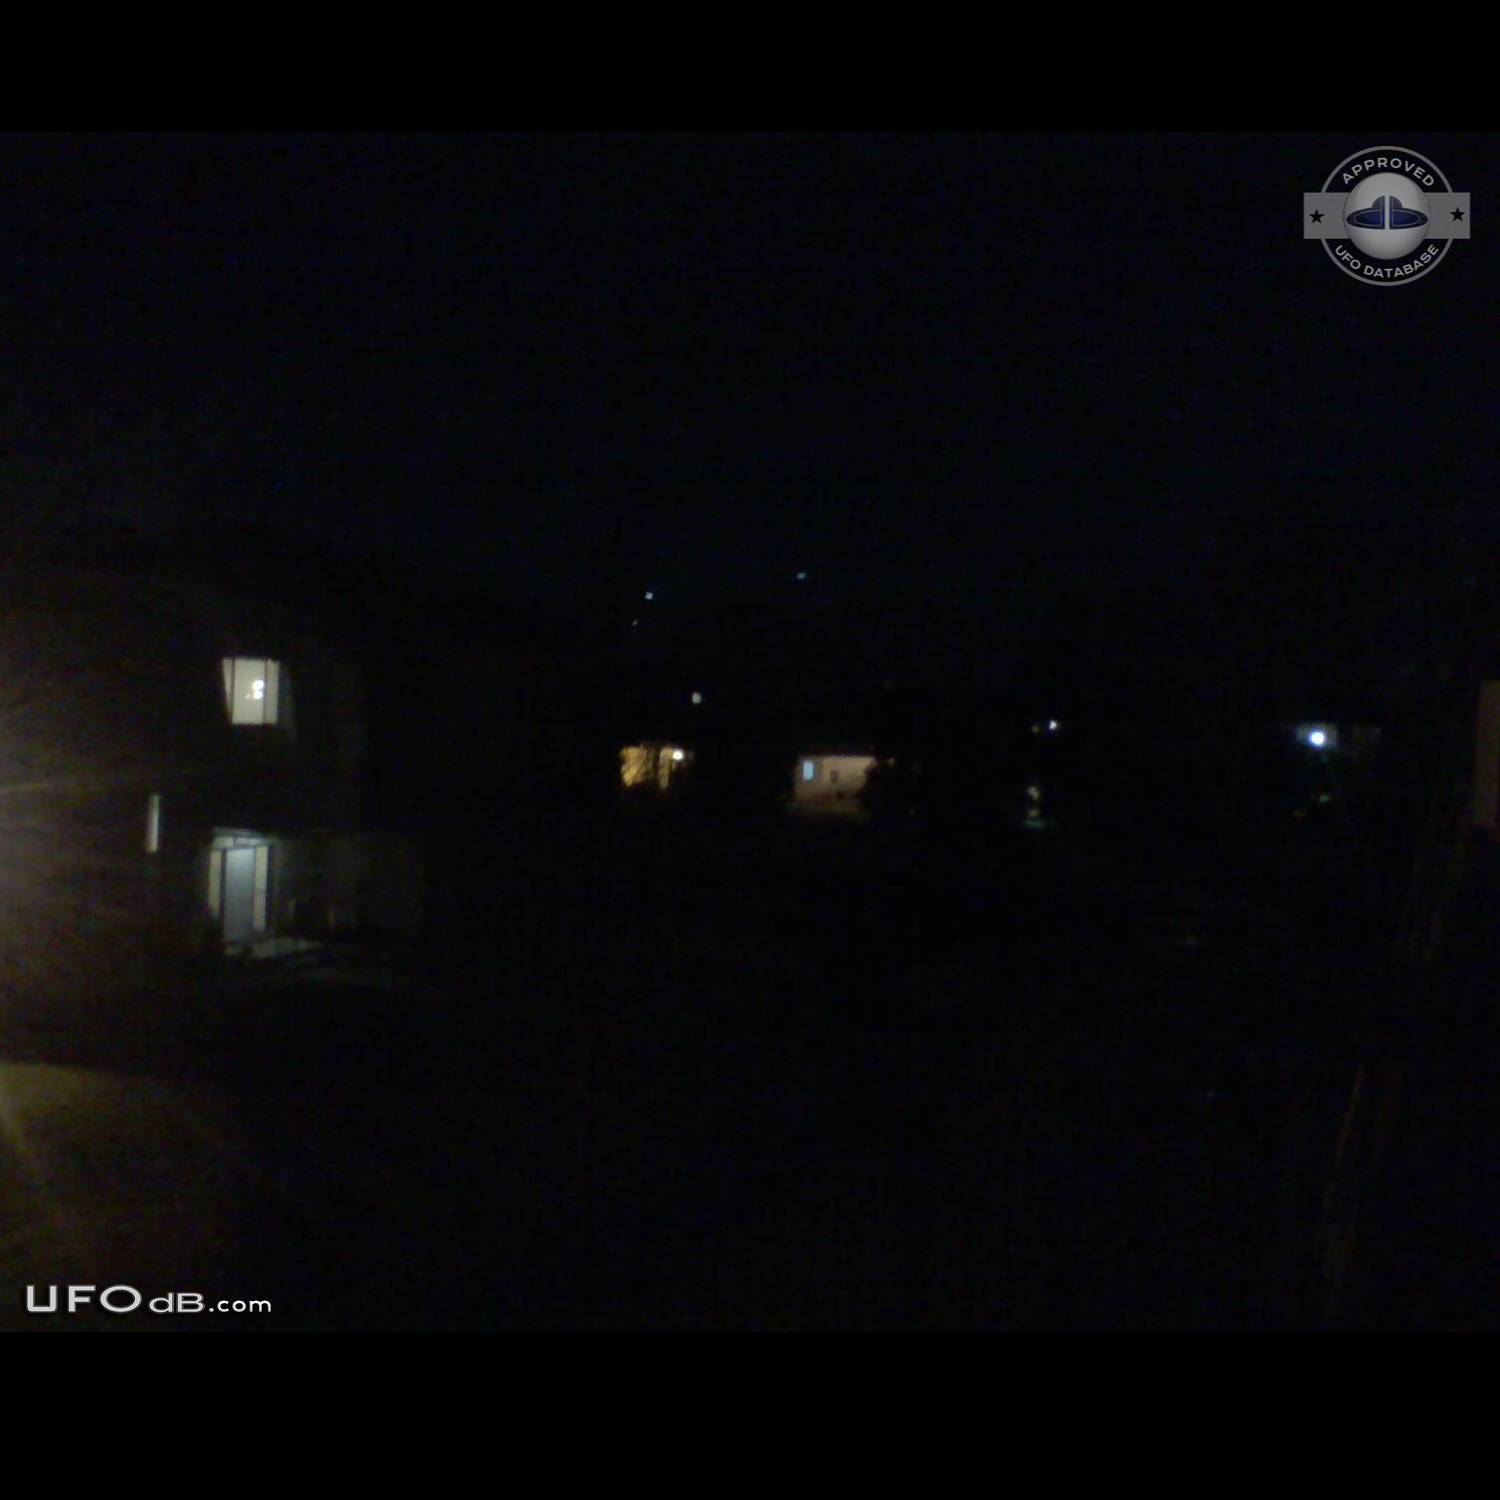 At least 20 UFOs flying near each other very bright & fast Westland MI UFO Picture #548-1